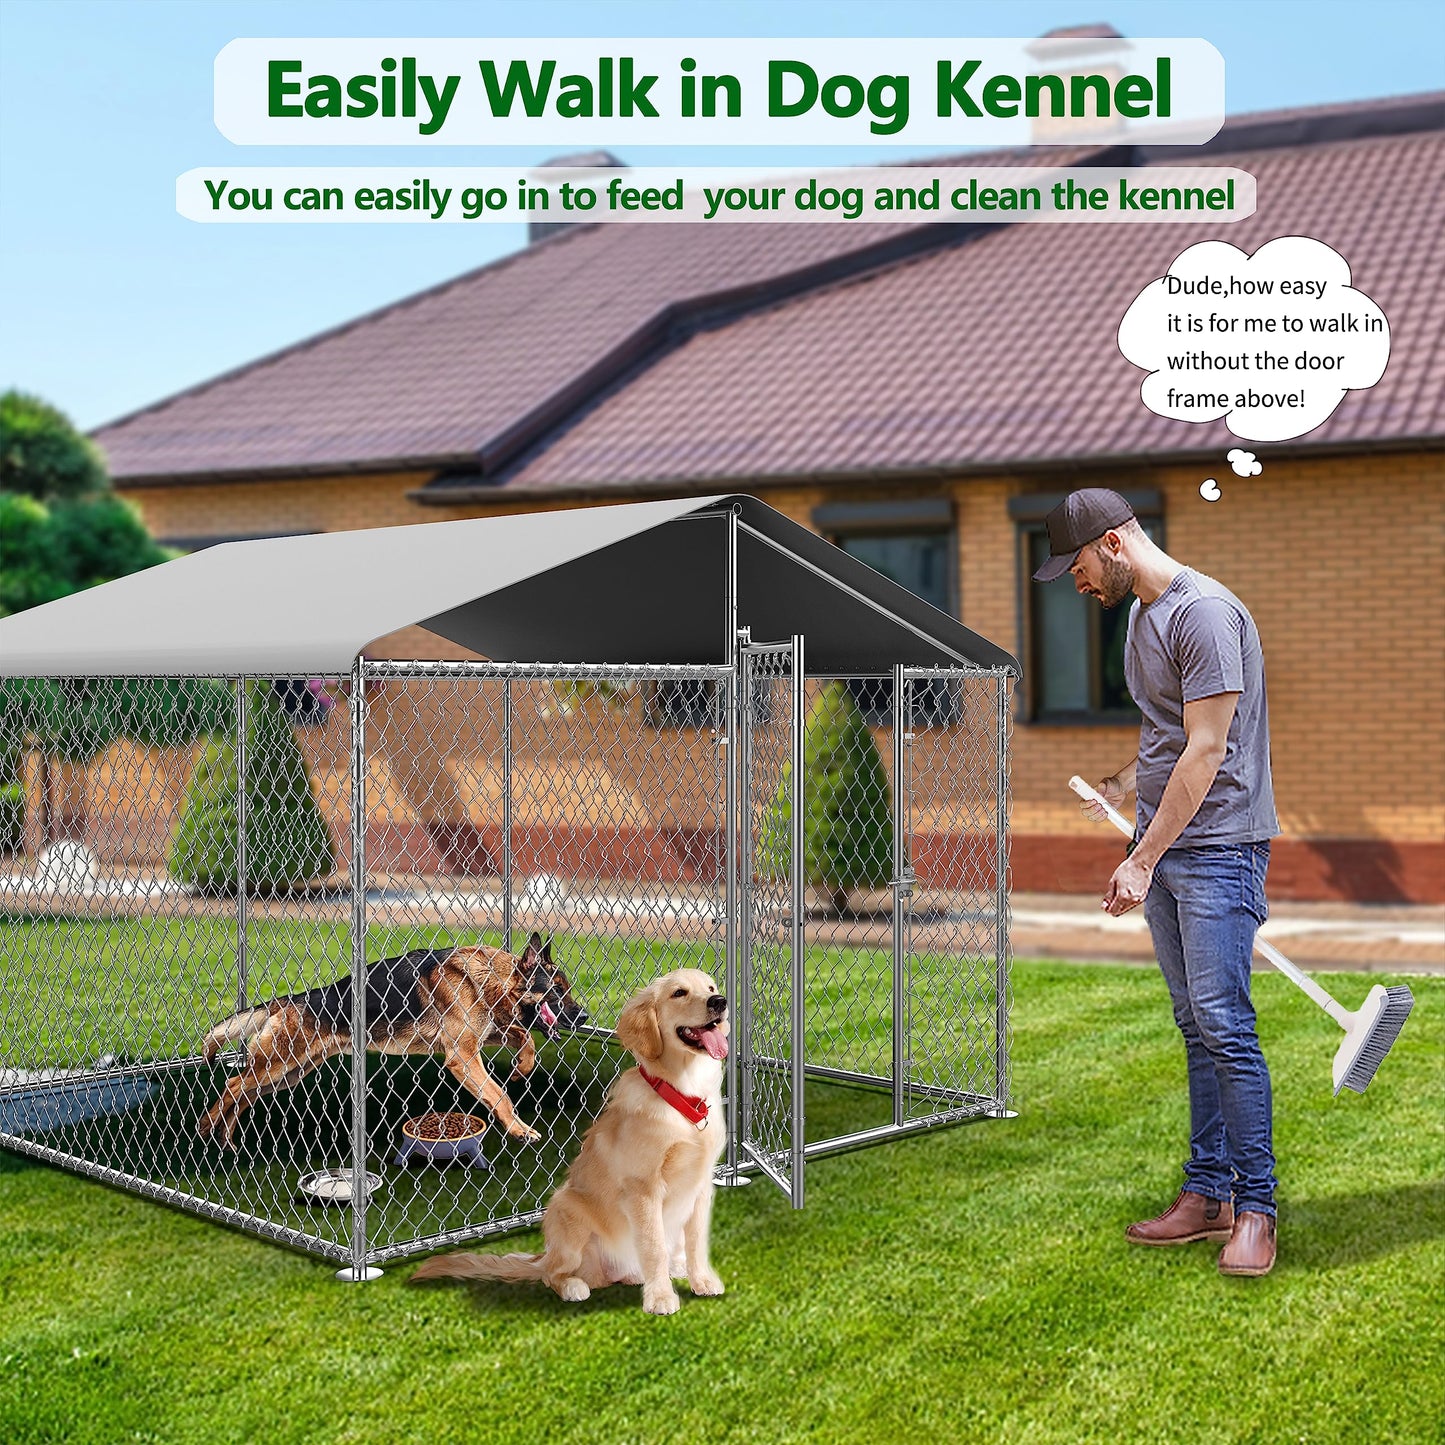 Large Dog Kennel Outdoor, Heavy Duty Outdoor Dog Kennel Chain Link Dog Cage Dog Playpen Dogs Run with Lock UV & Waterproof Roof for Backyard (7.5 * 7.5 * 5.6FT)